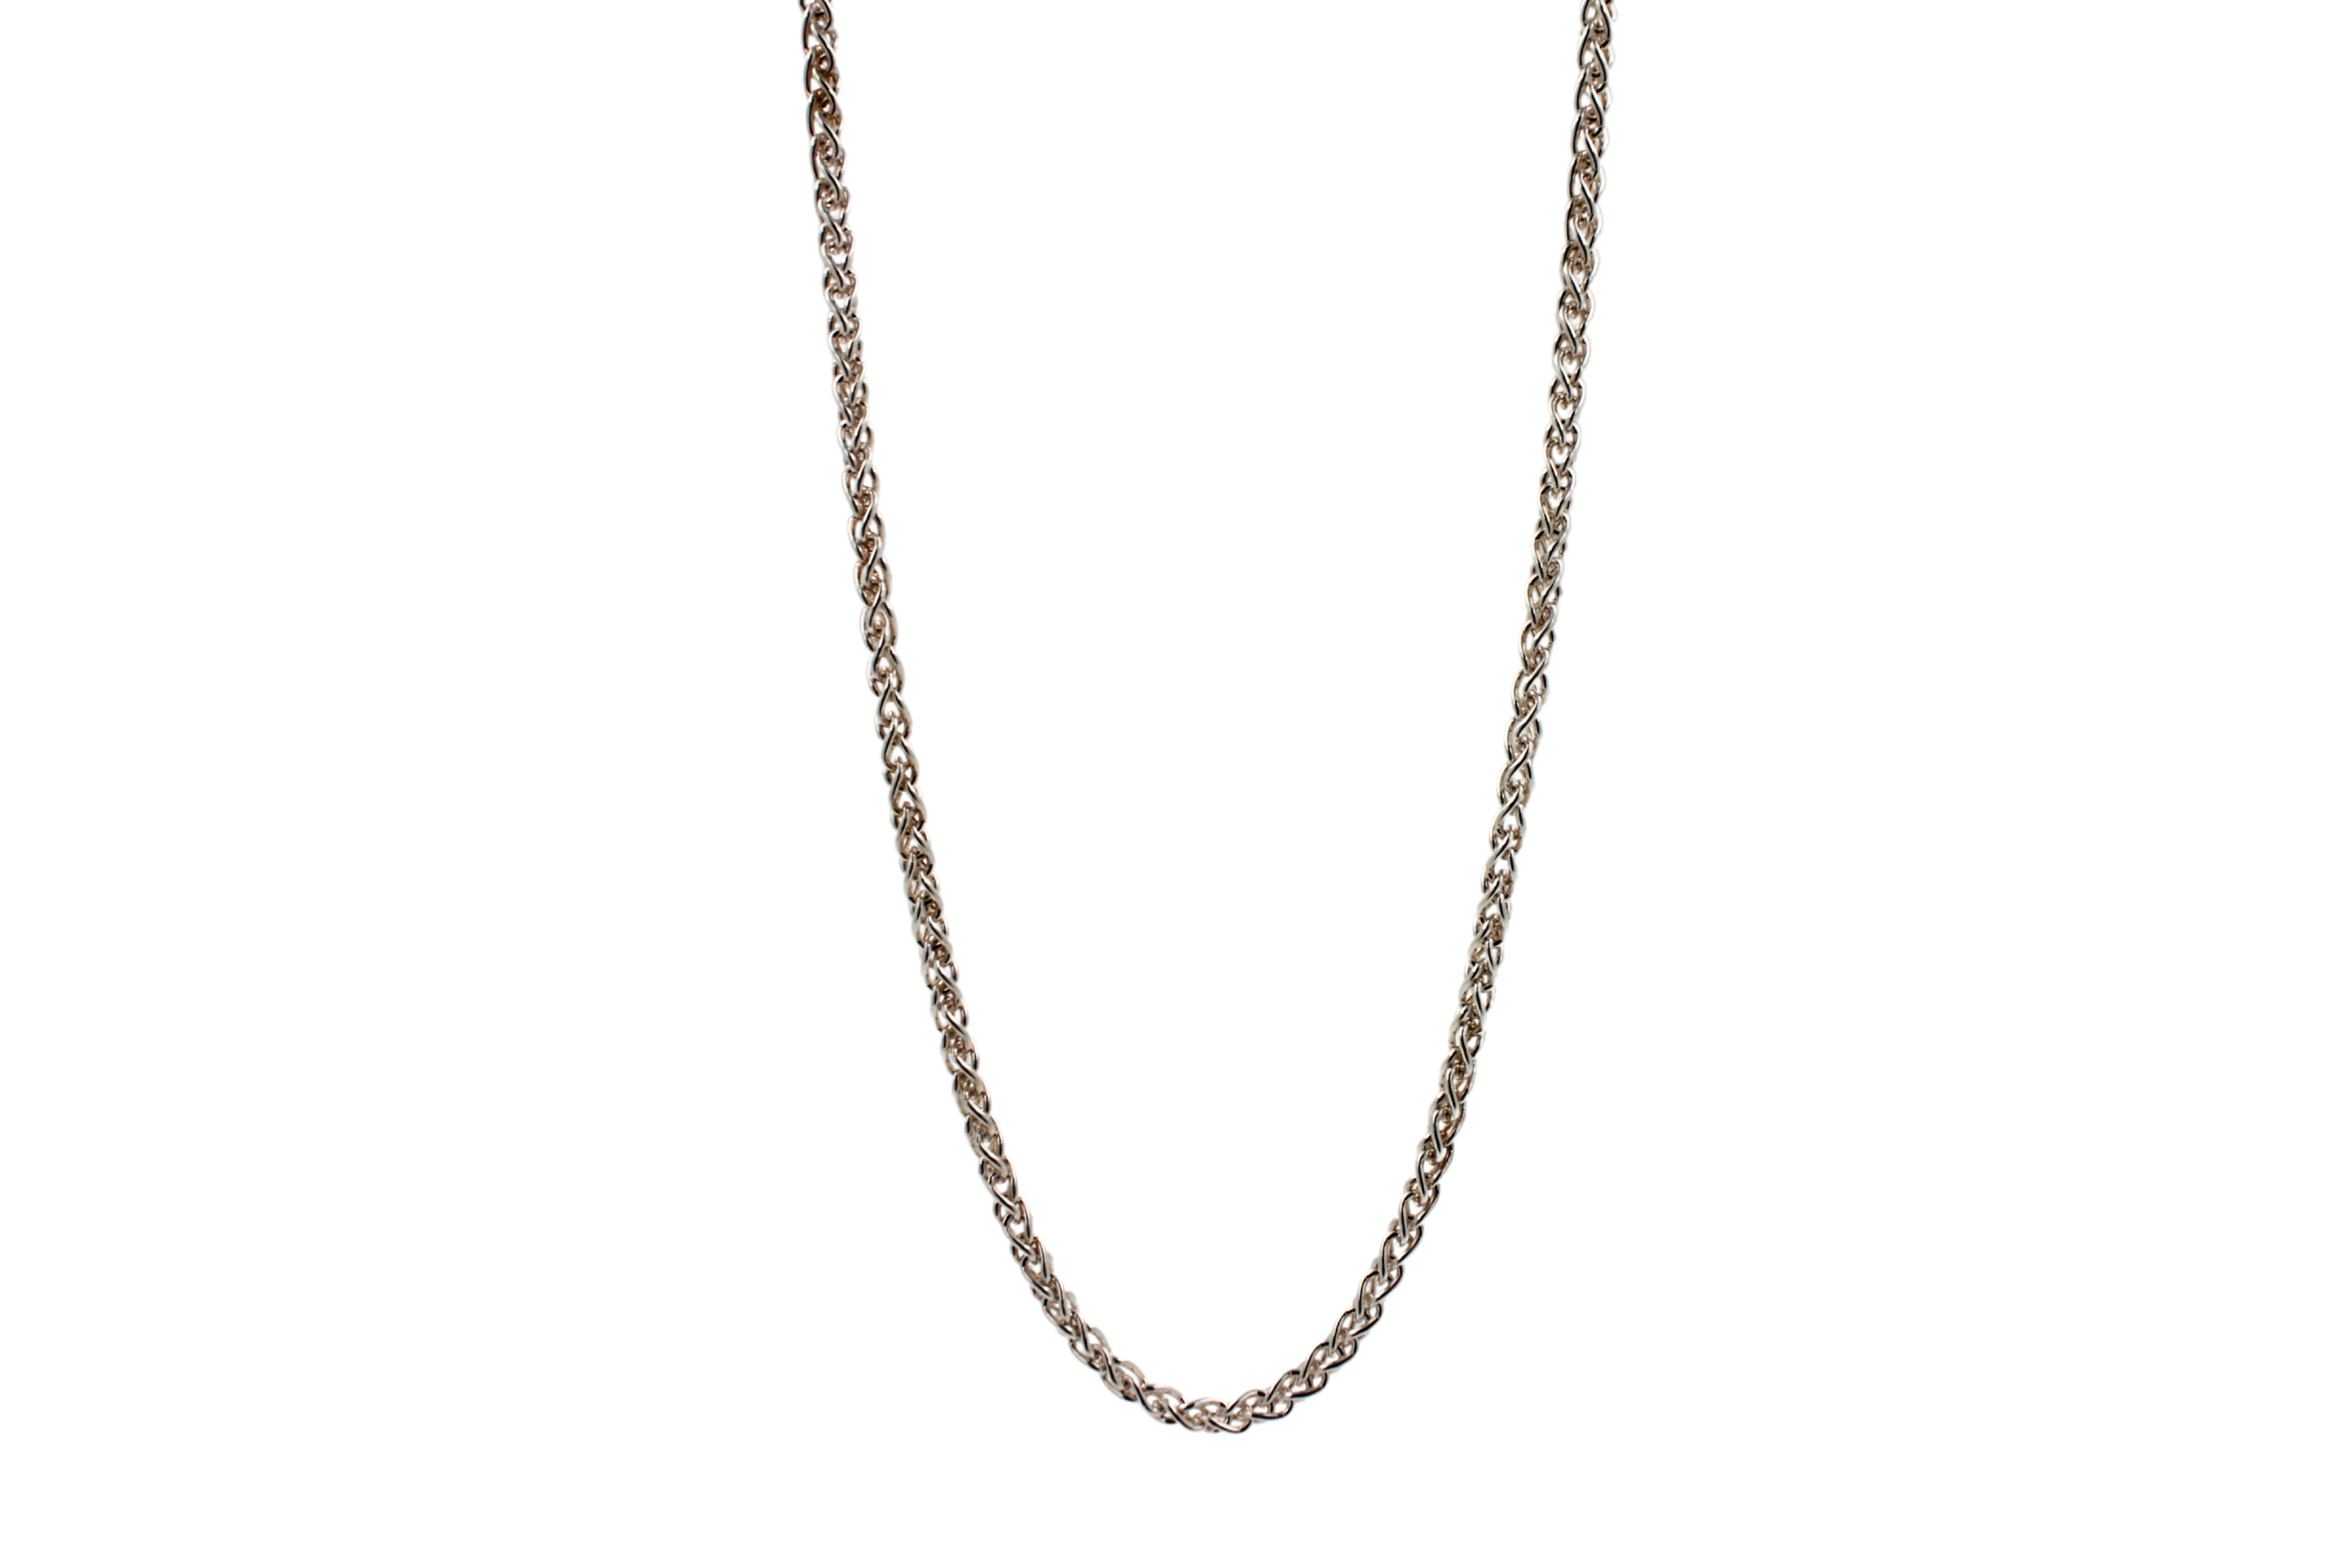 Foxtail Link Fancy Link 925 Sterling Silver Chain Necklace
•	24 inches length
•	11.20 grams 
•	2.3mm width 
•       Solid Sterling Silver 925
•	White Rhodium Plate Finish



